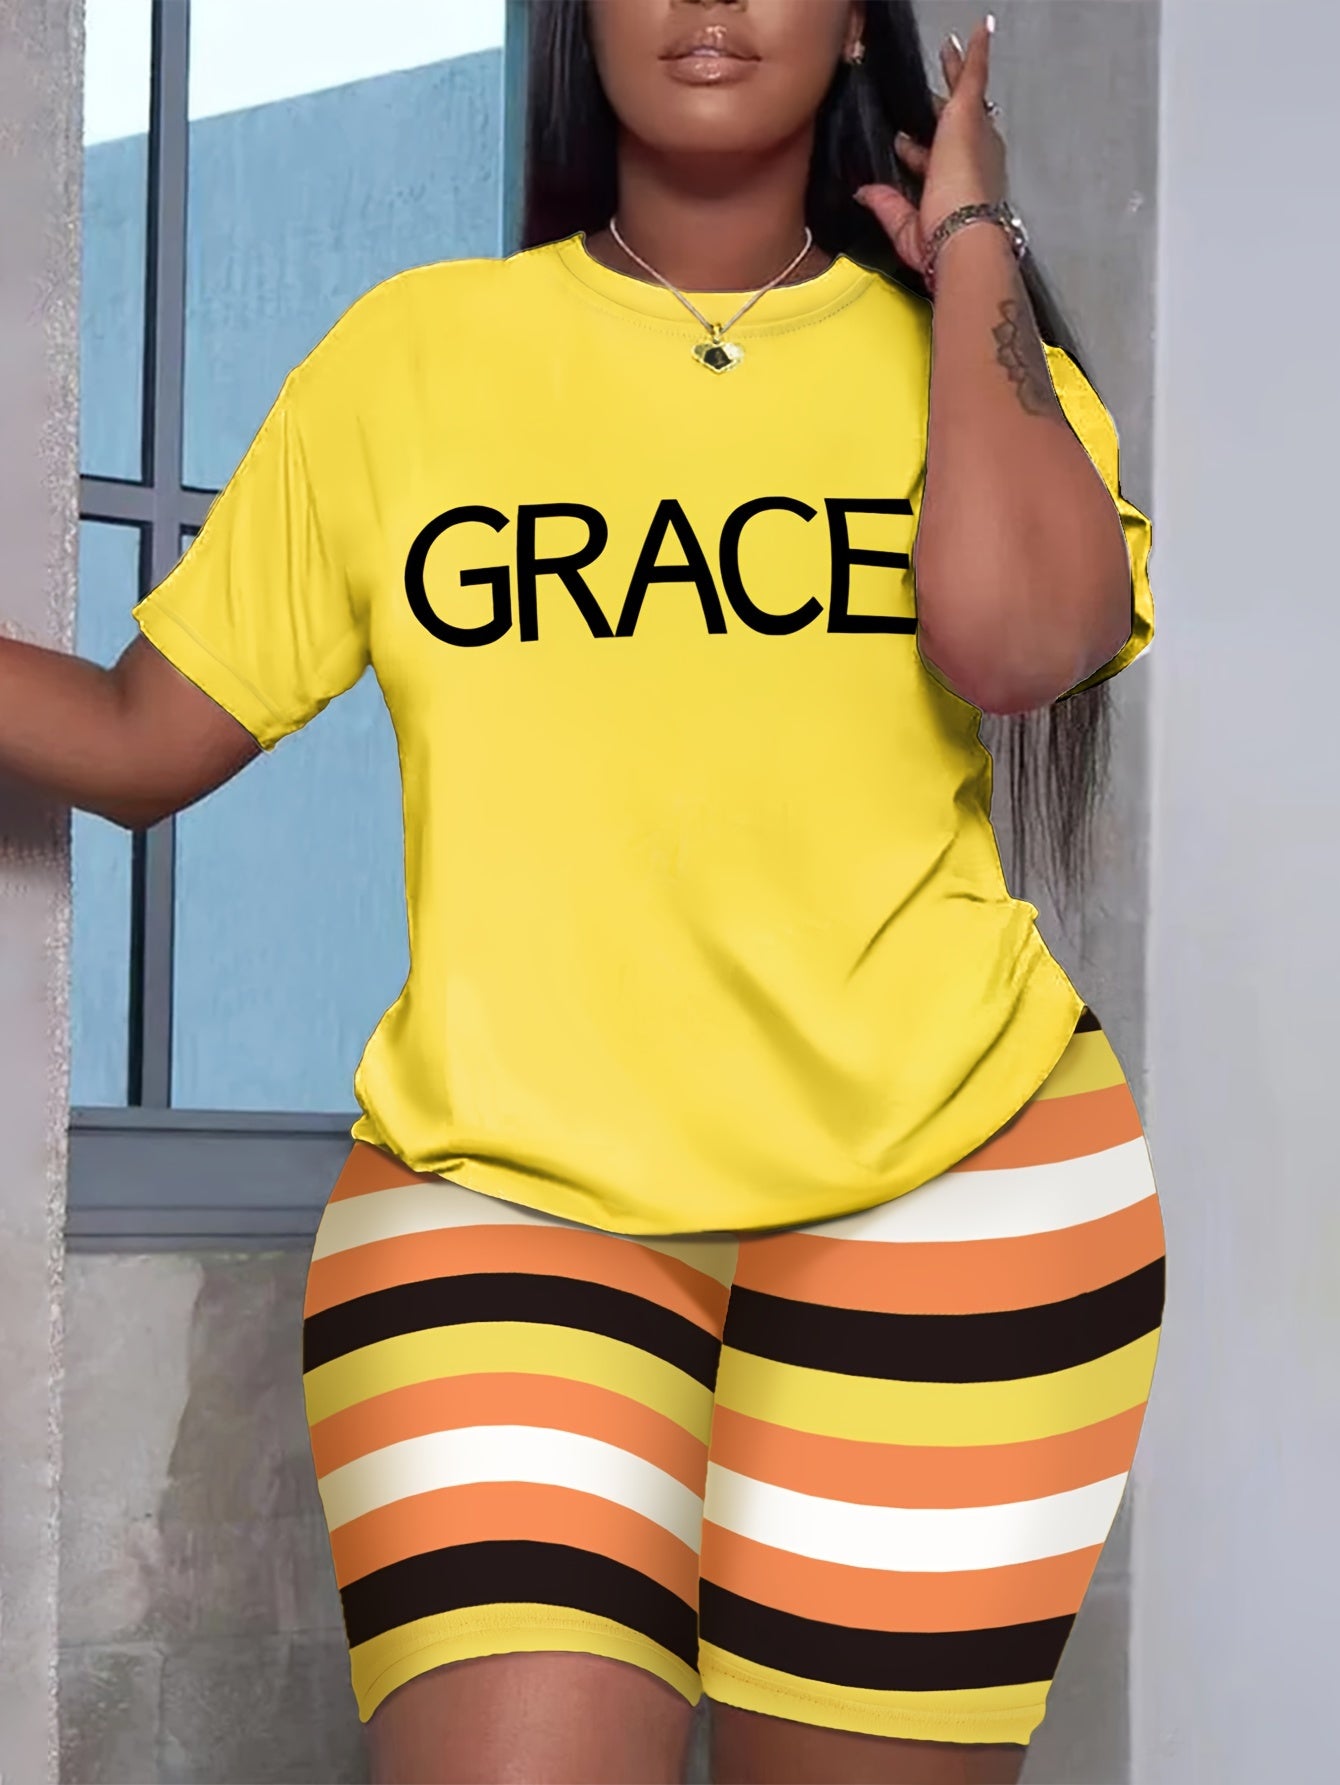 Grace Plus Size Women's Christian Casual Outfit claimedbygoddesigns